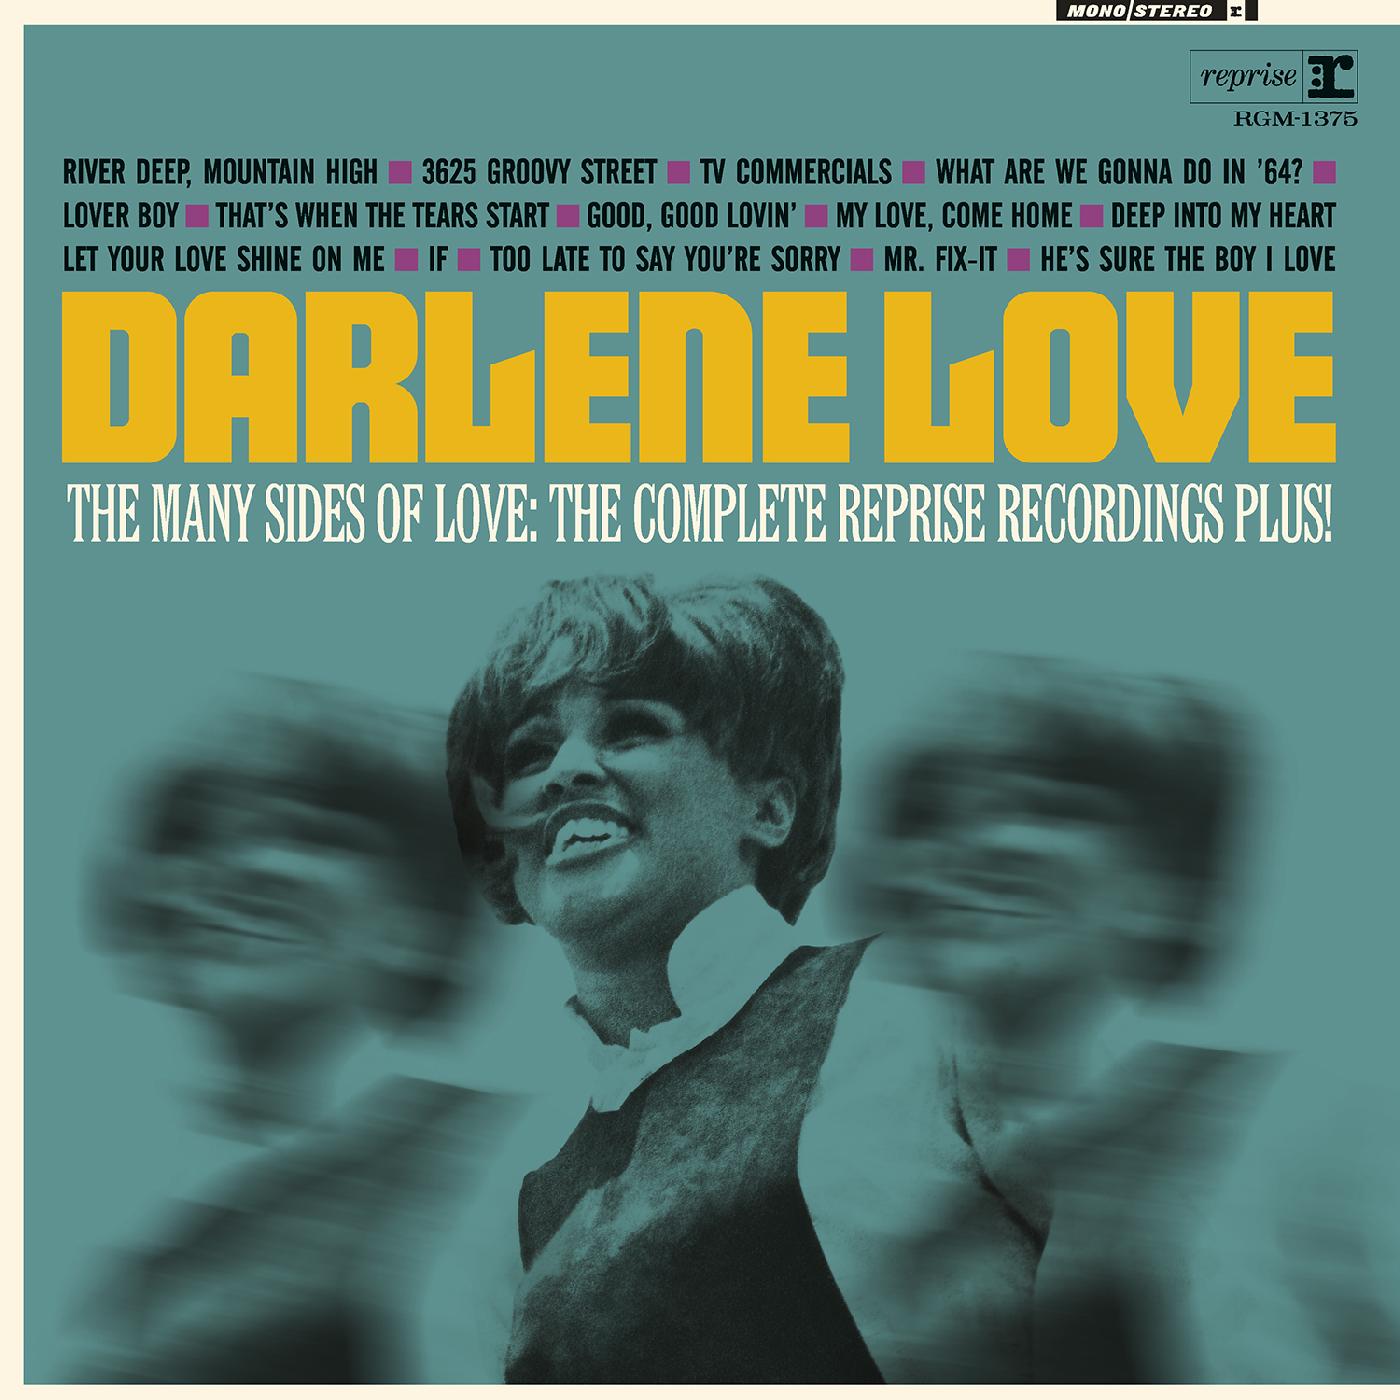 Darlene Love | Darlene Love: The Many Sides of Love - The Complete Reprise Recordings Plus! | CD